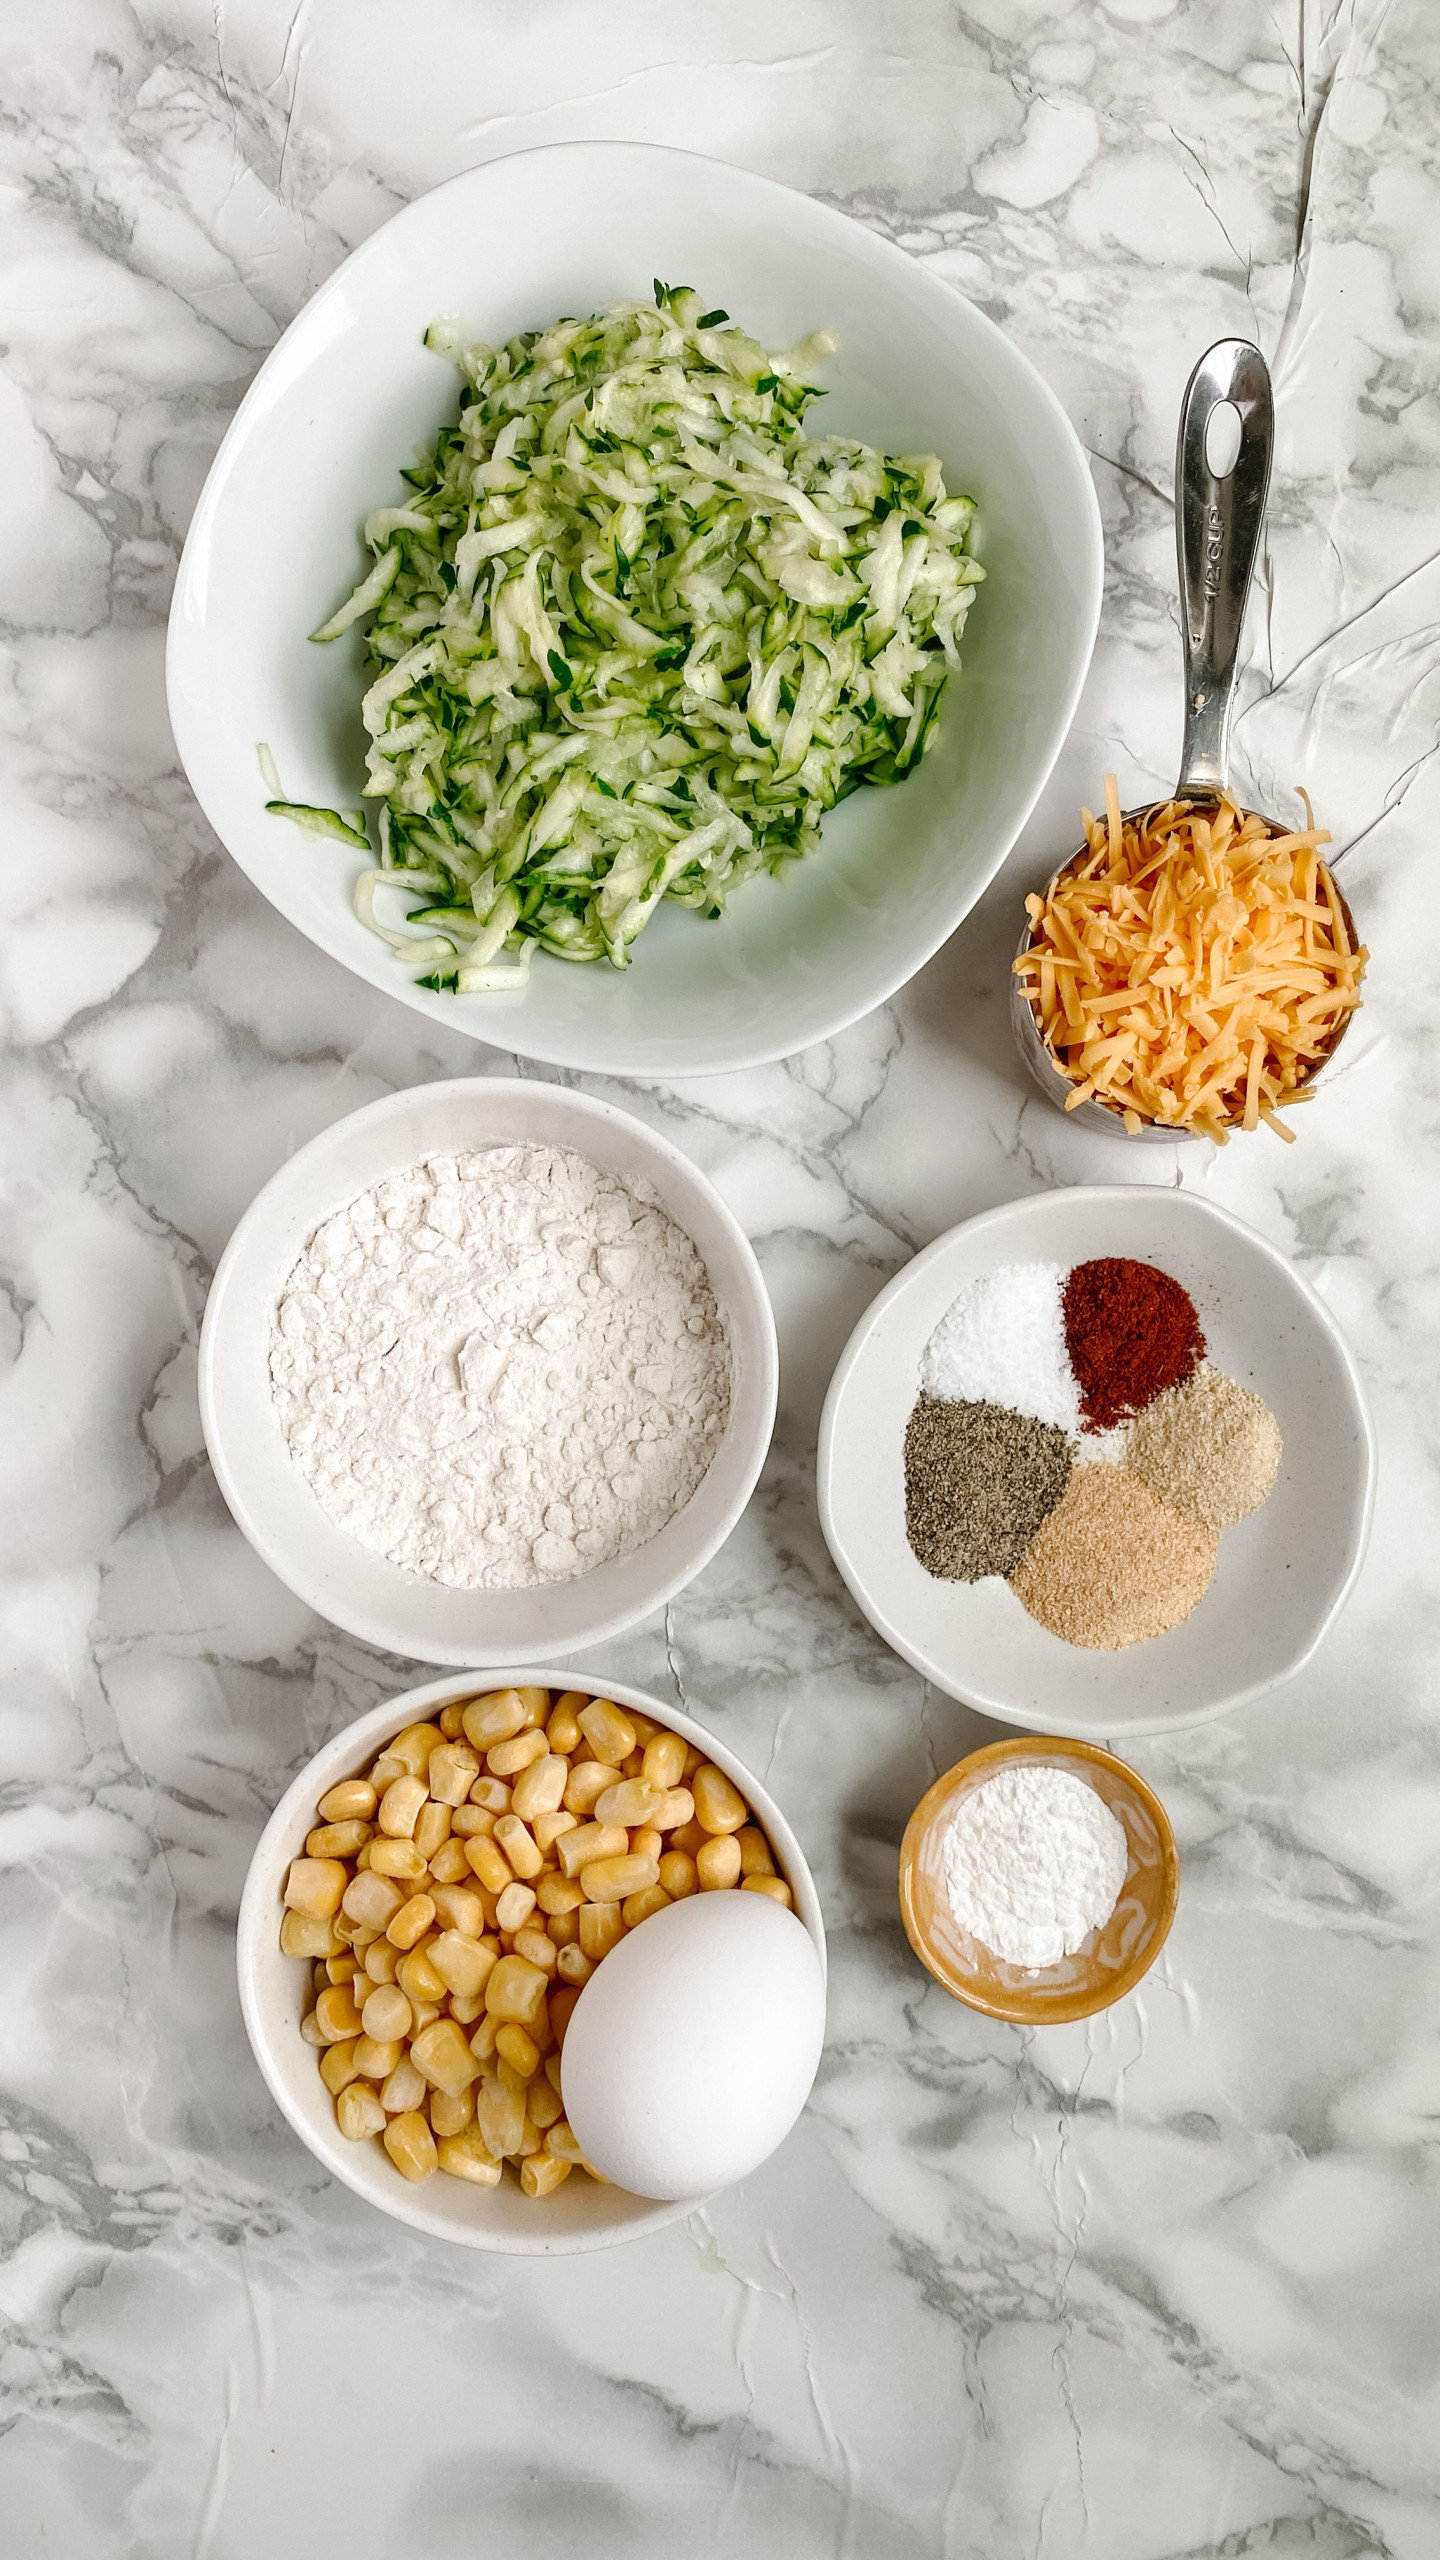 Ingredients in bowls for zucchini and corn fritters on a white marble surface.